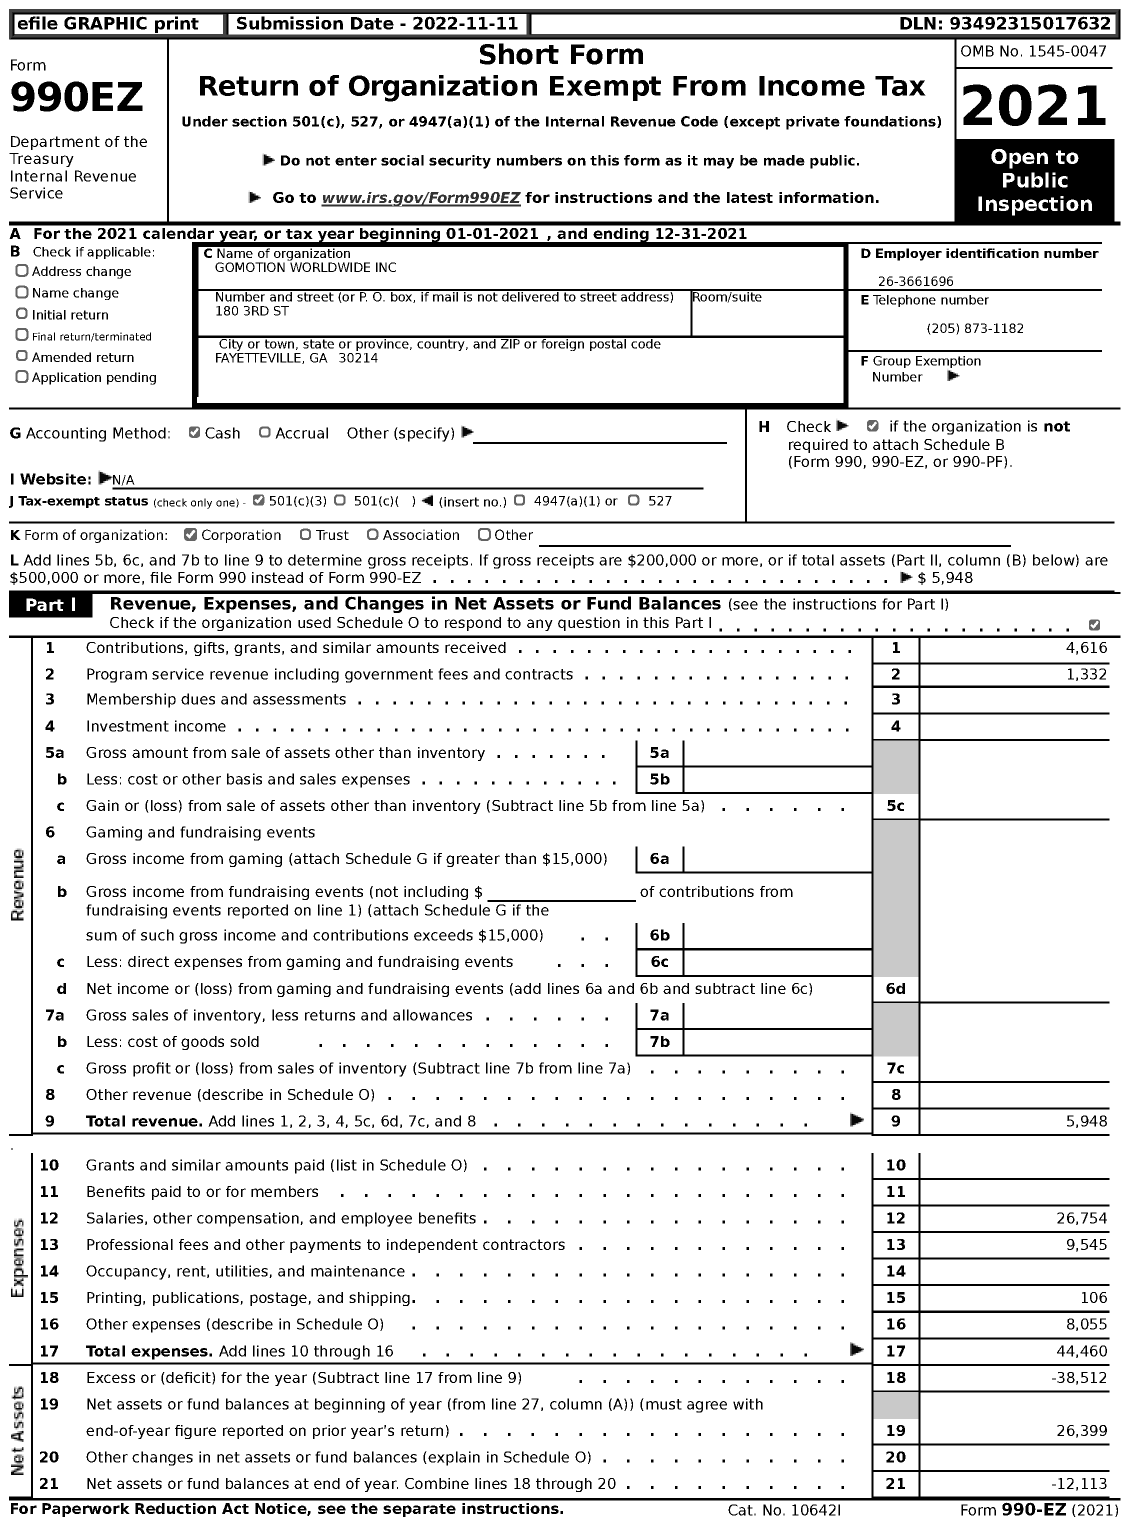 Image of first page of 2021 Form 990EZ for Gomotion Worldwide